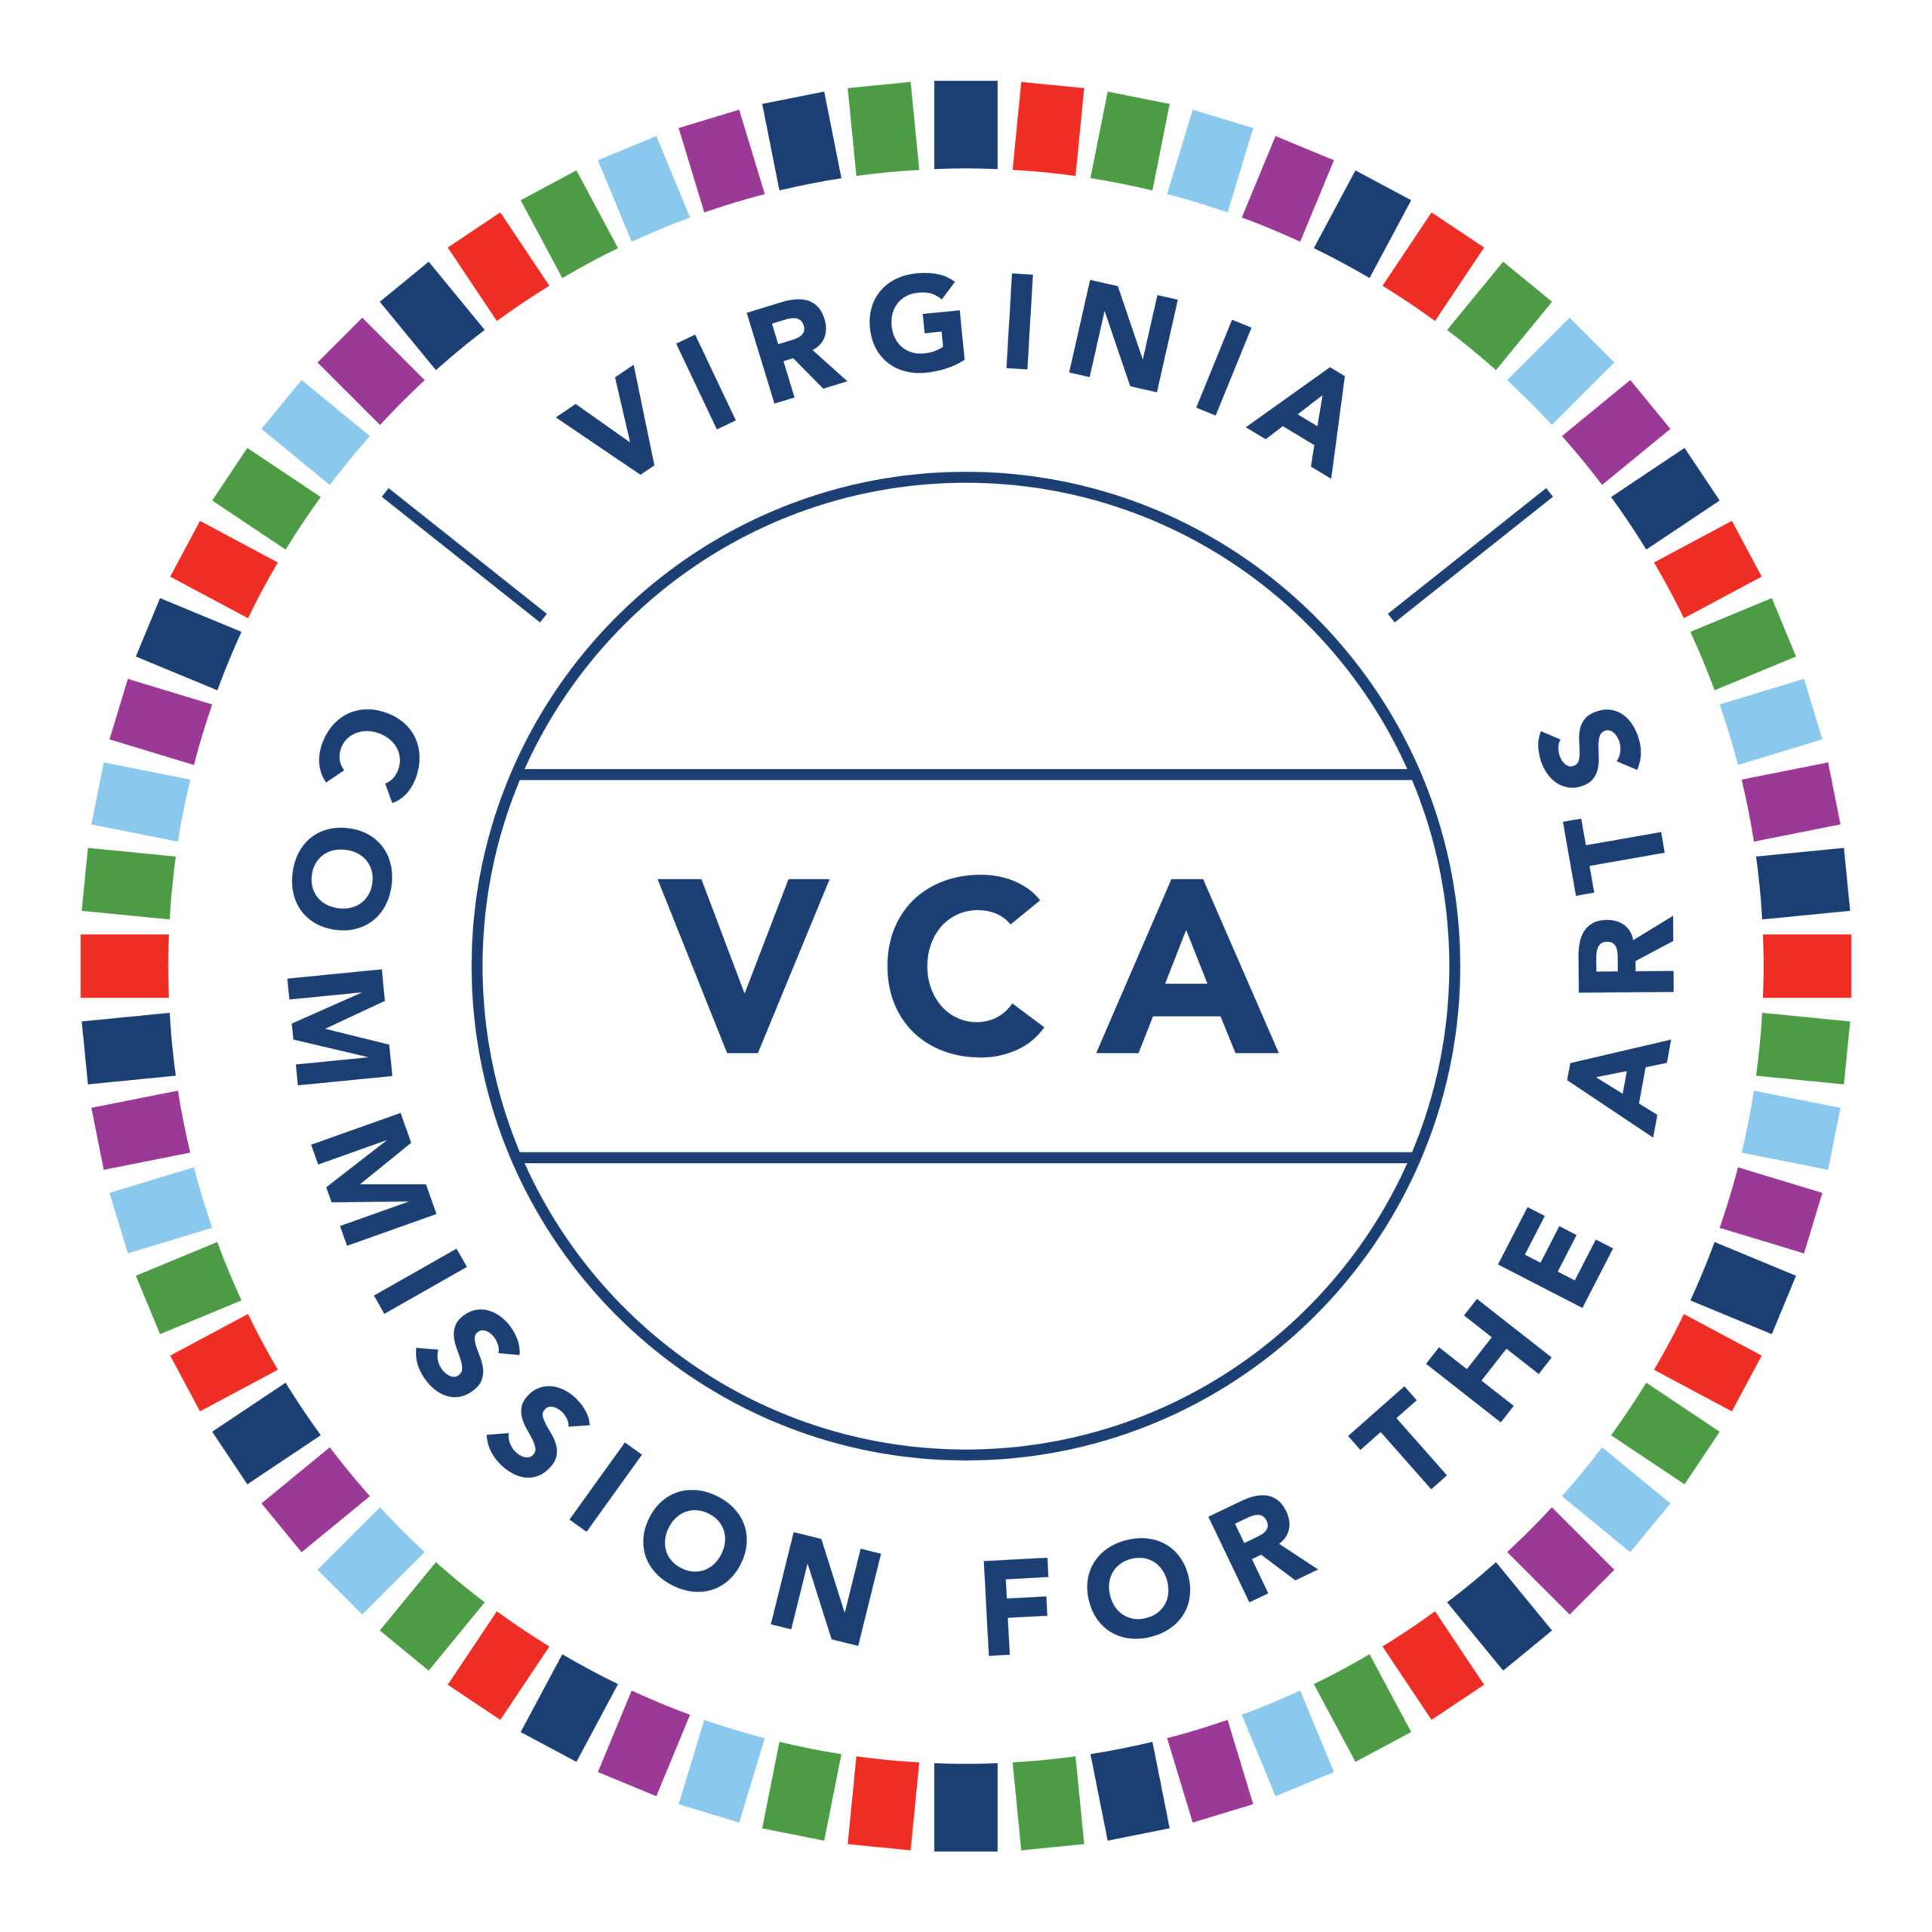 The Virginia Commission for the Arts